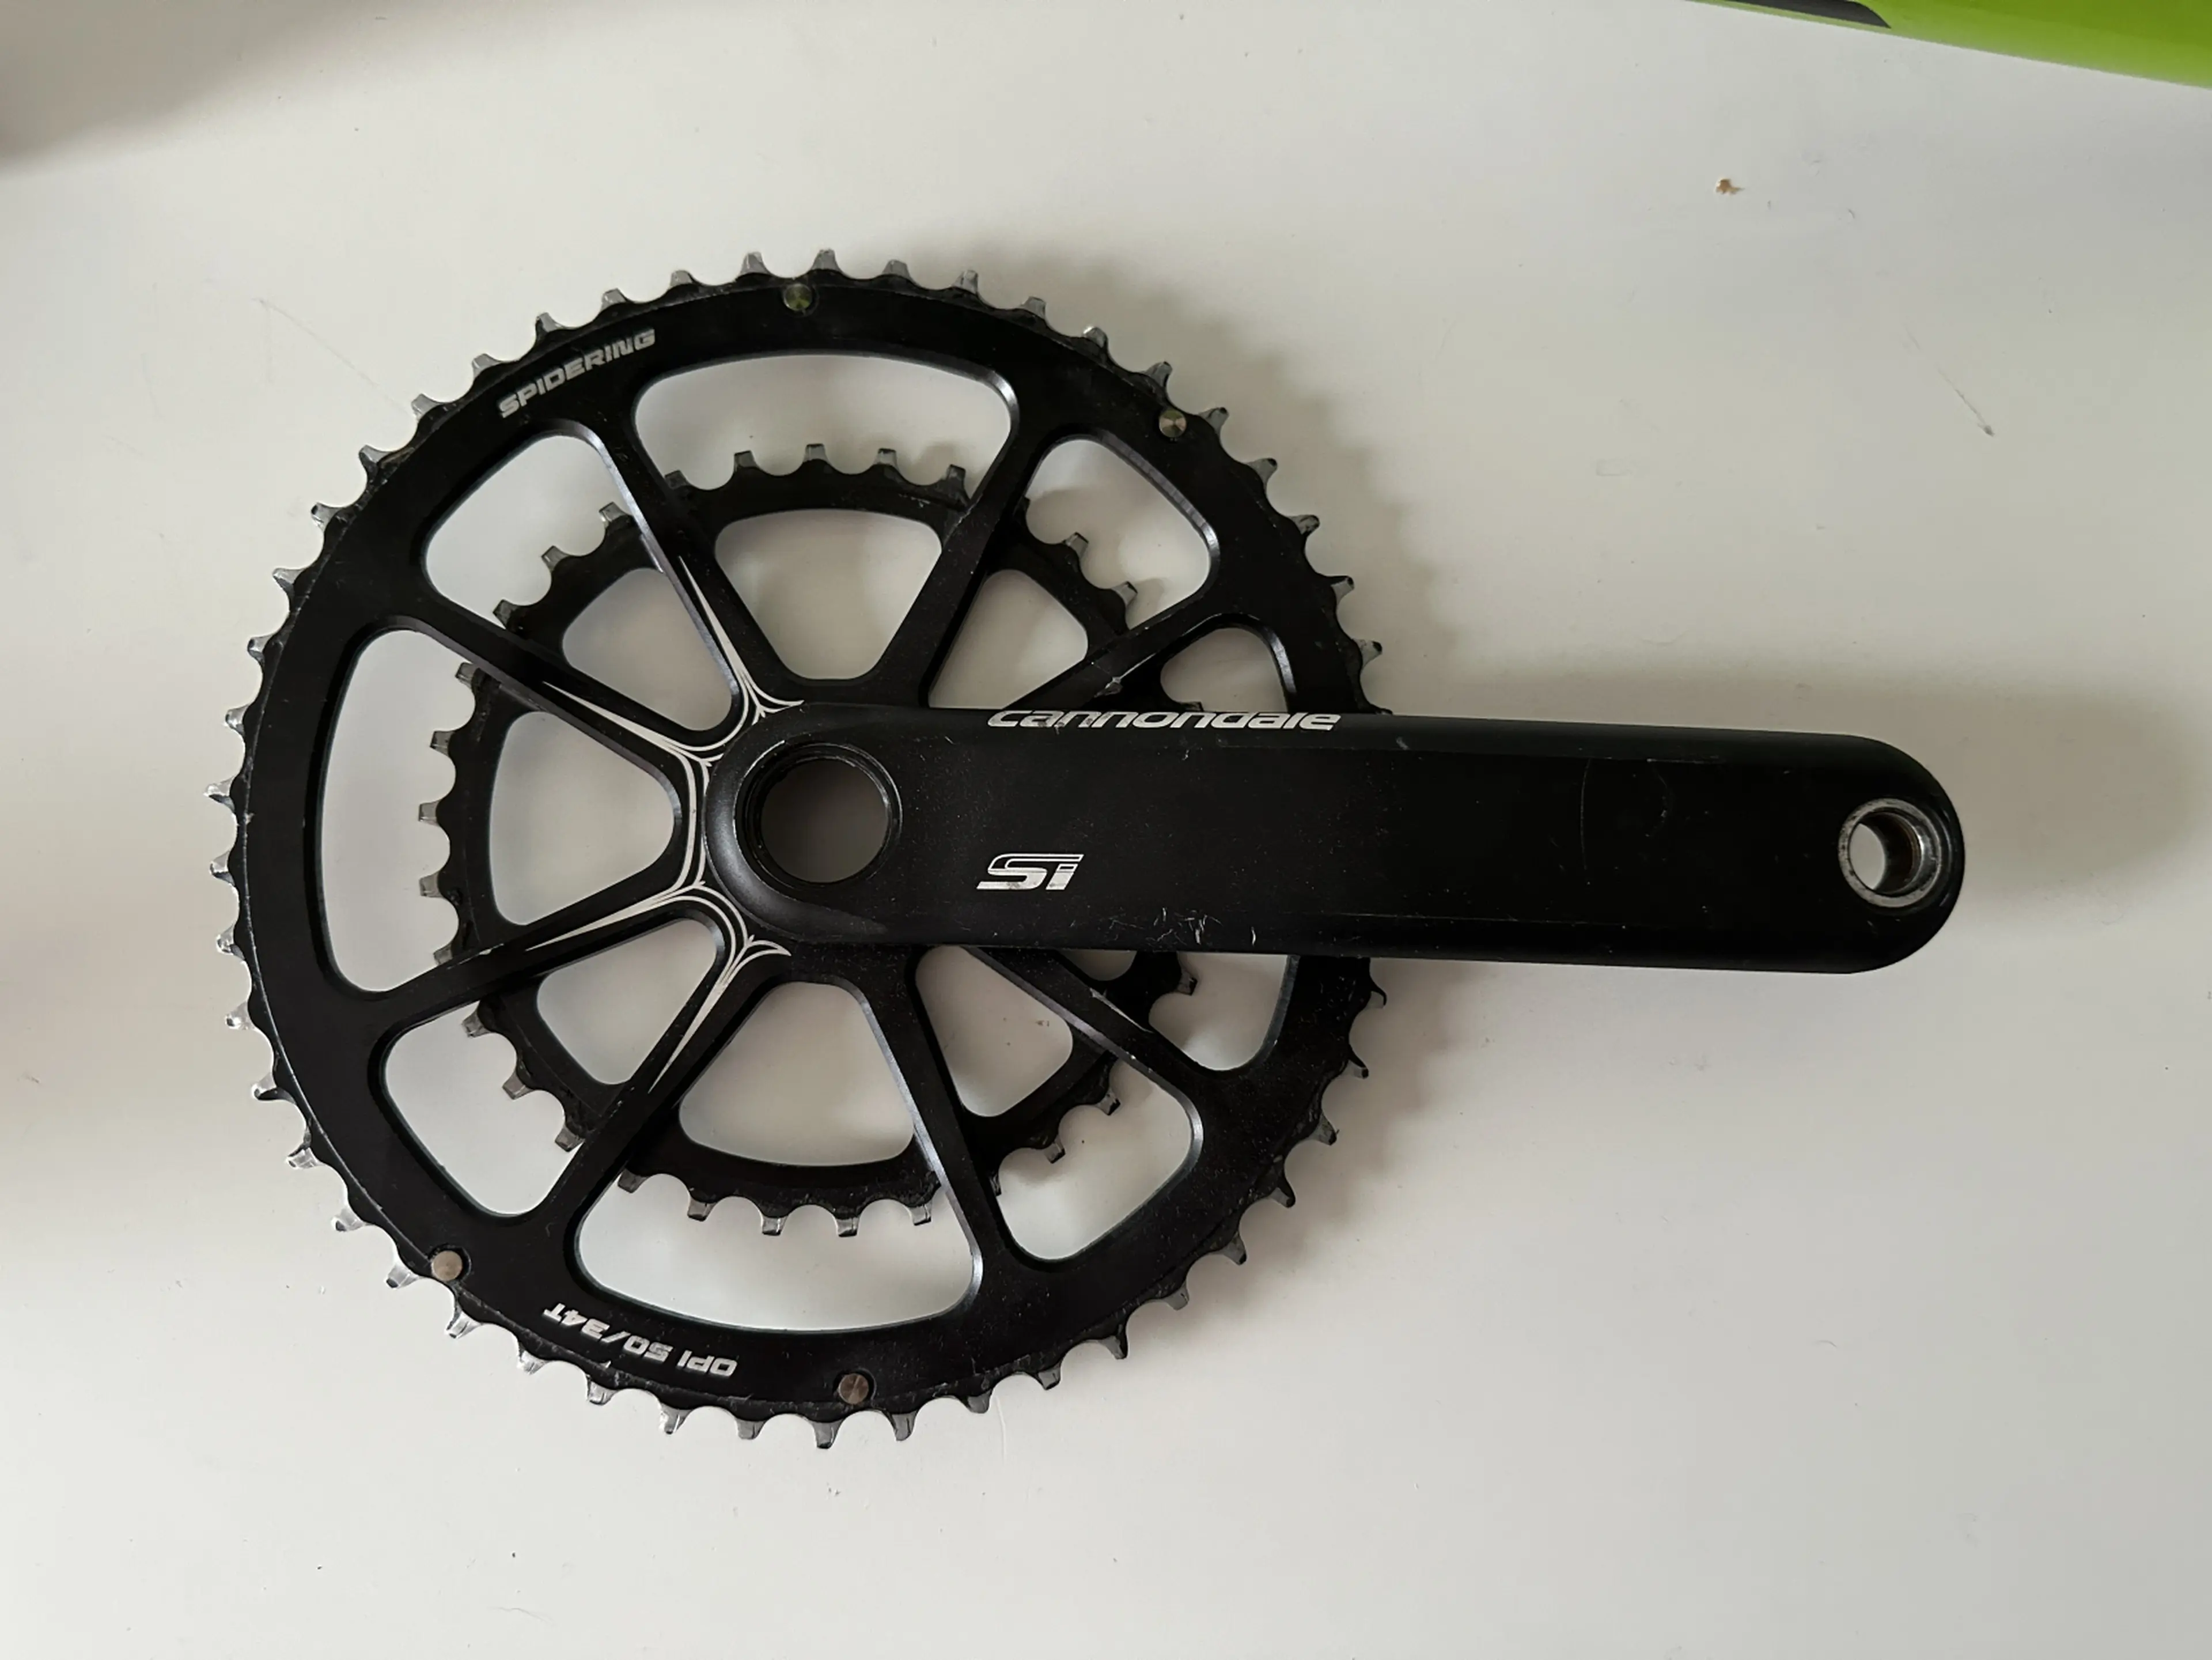 5. Cannondale Synapse Disc + Ultregra Di2 groupset